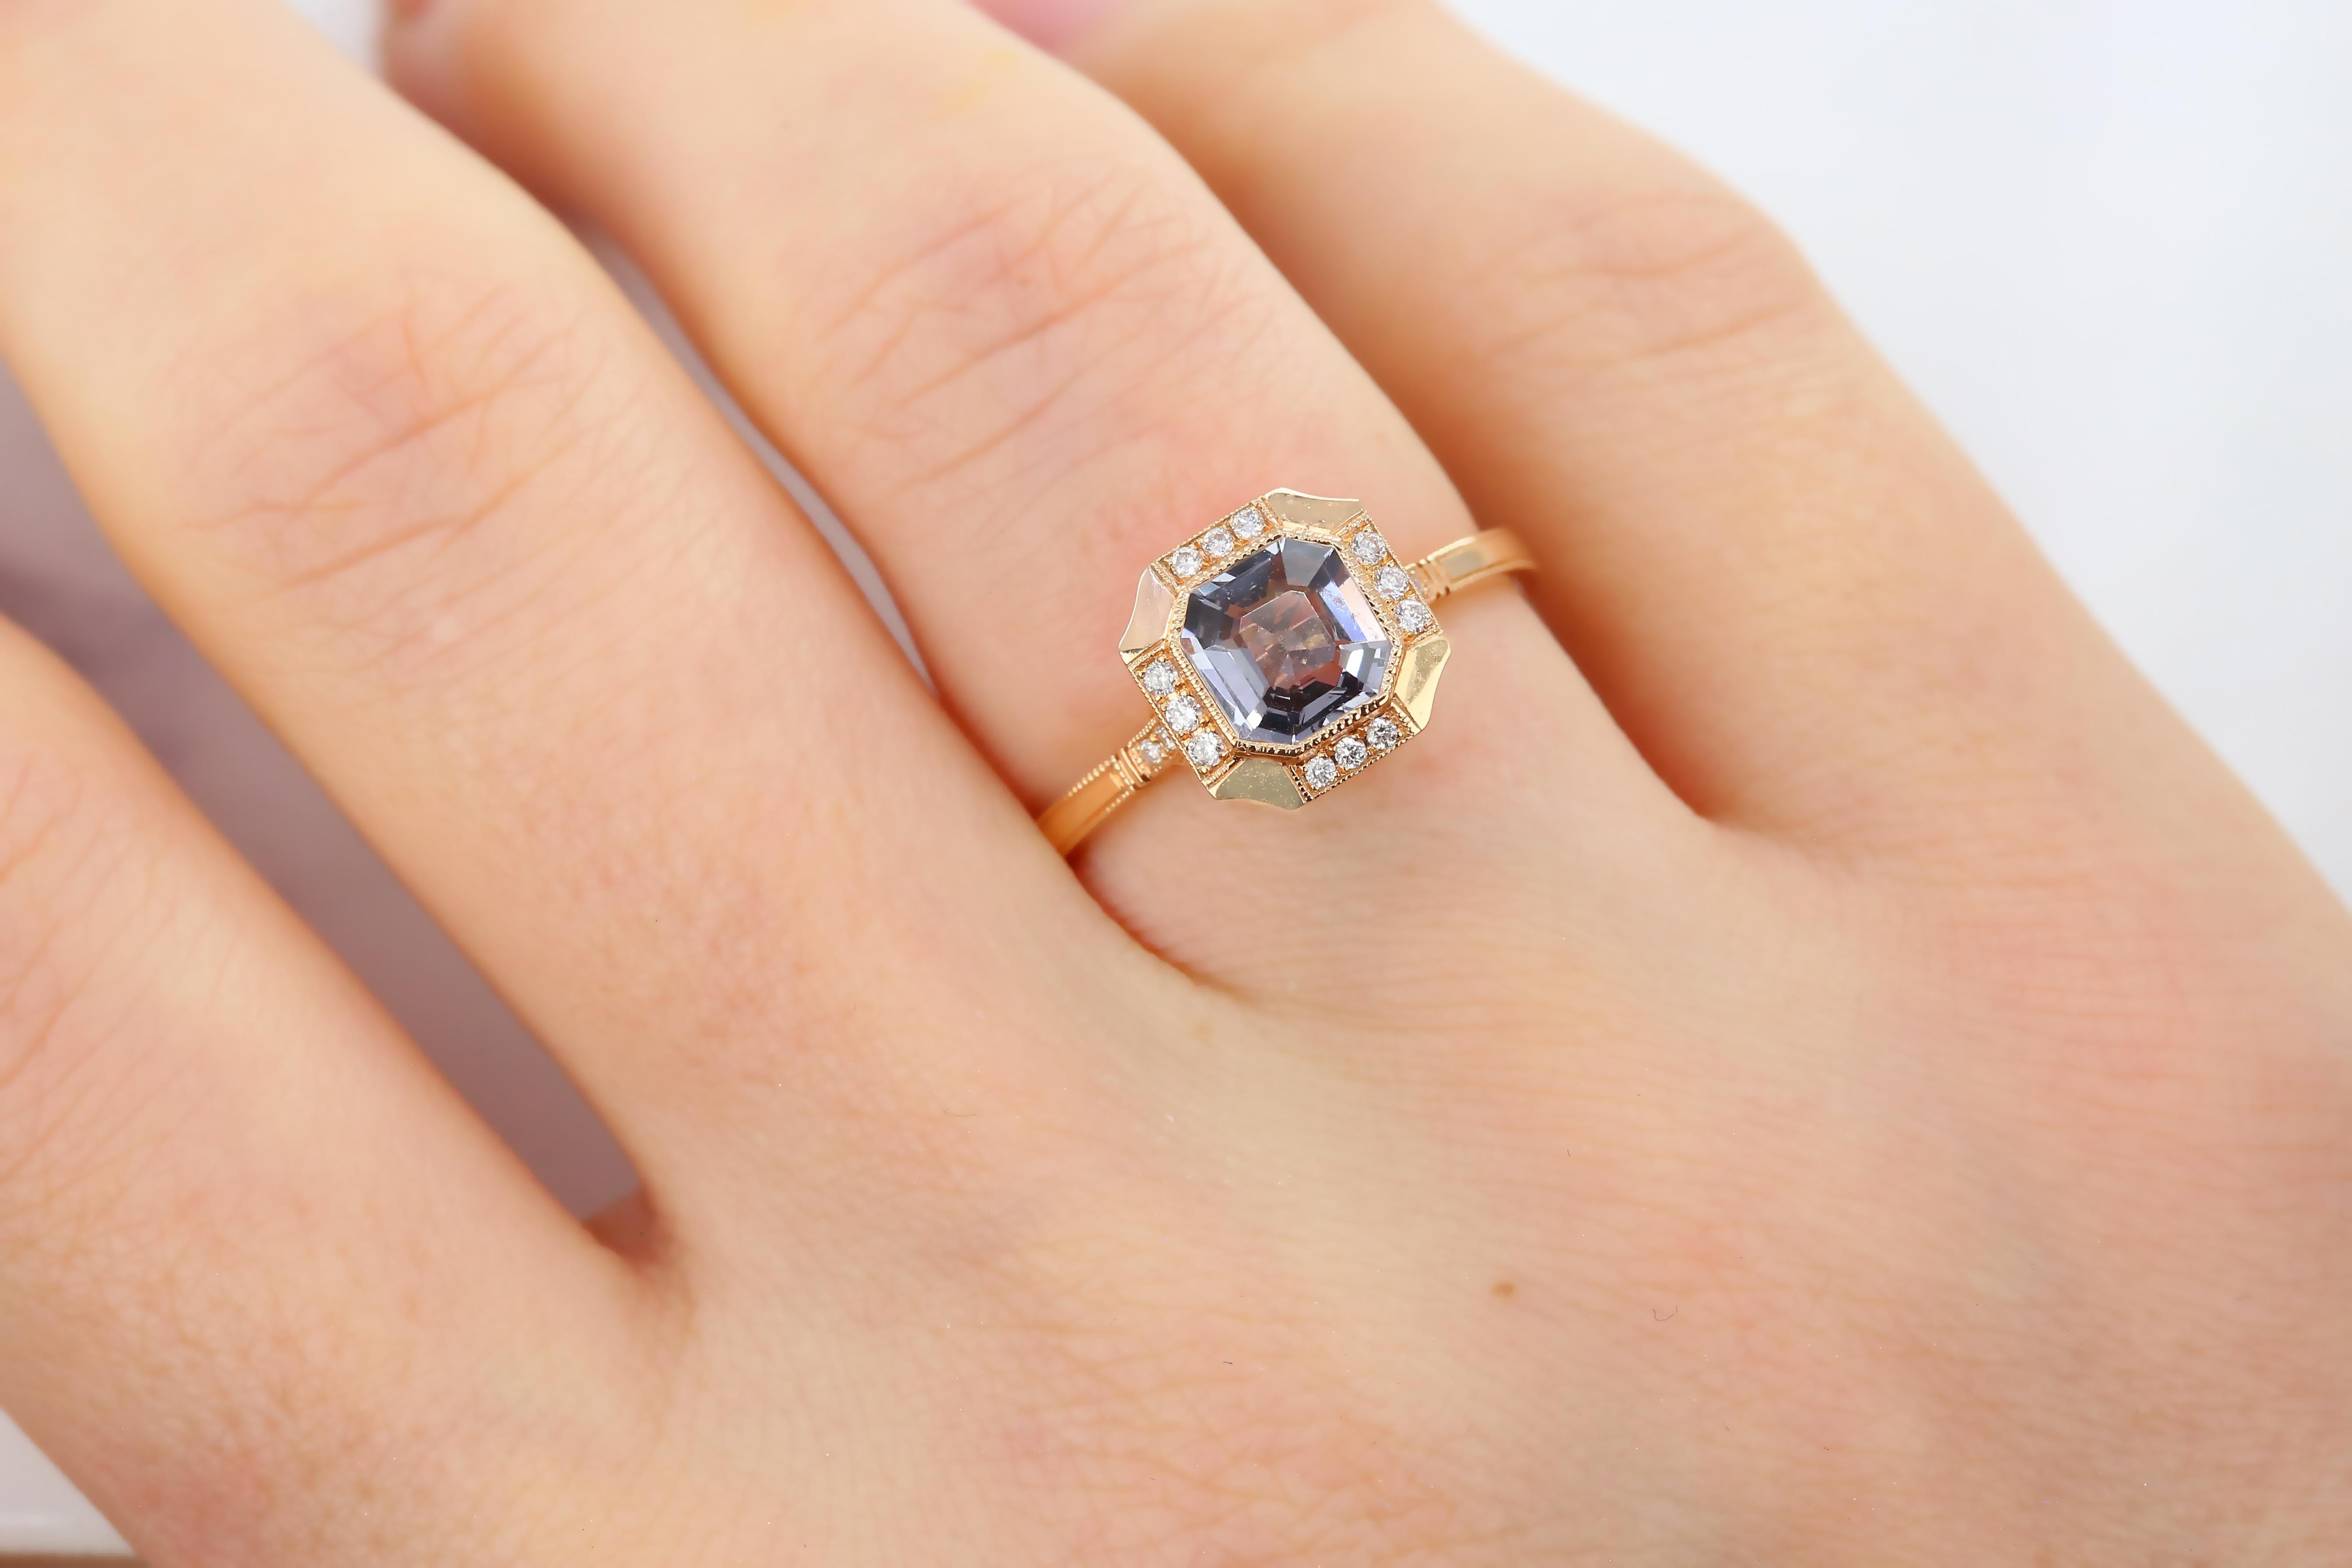 Vintage Style 0.99 Ct Spinel with Diamond Engagement Ring, 14K Solitaire Ring, created by hands from ring to the stone shapes.

I used brillant spinel in vintage style for lovers of vintage style engagement ring. I completed these in 14K solid